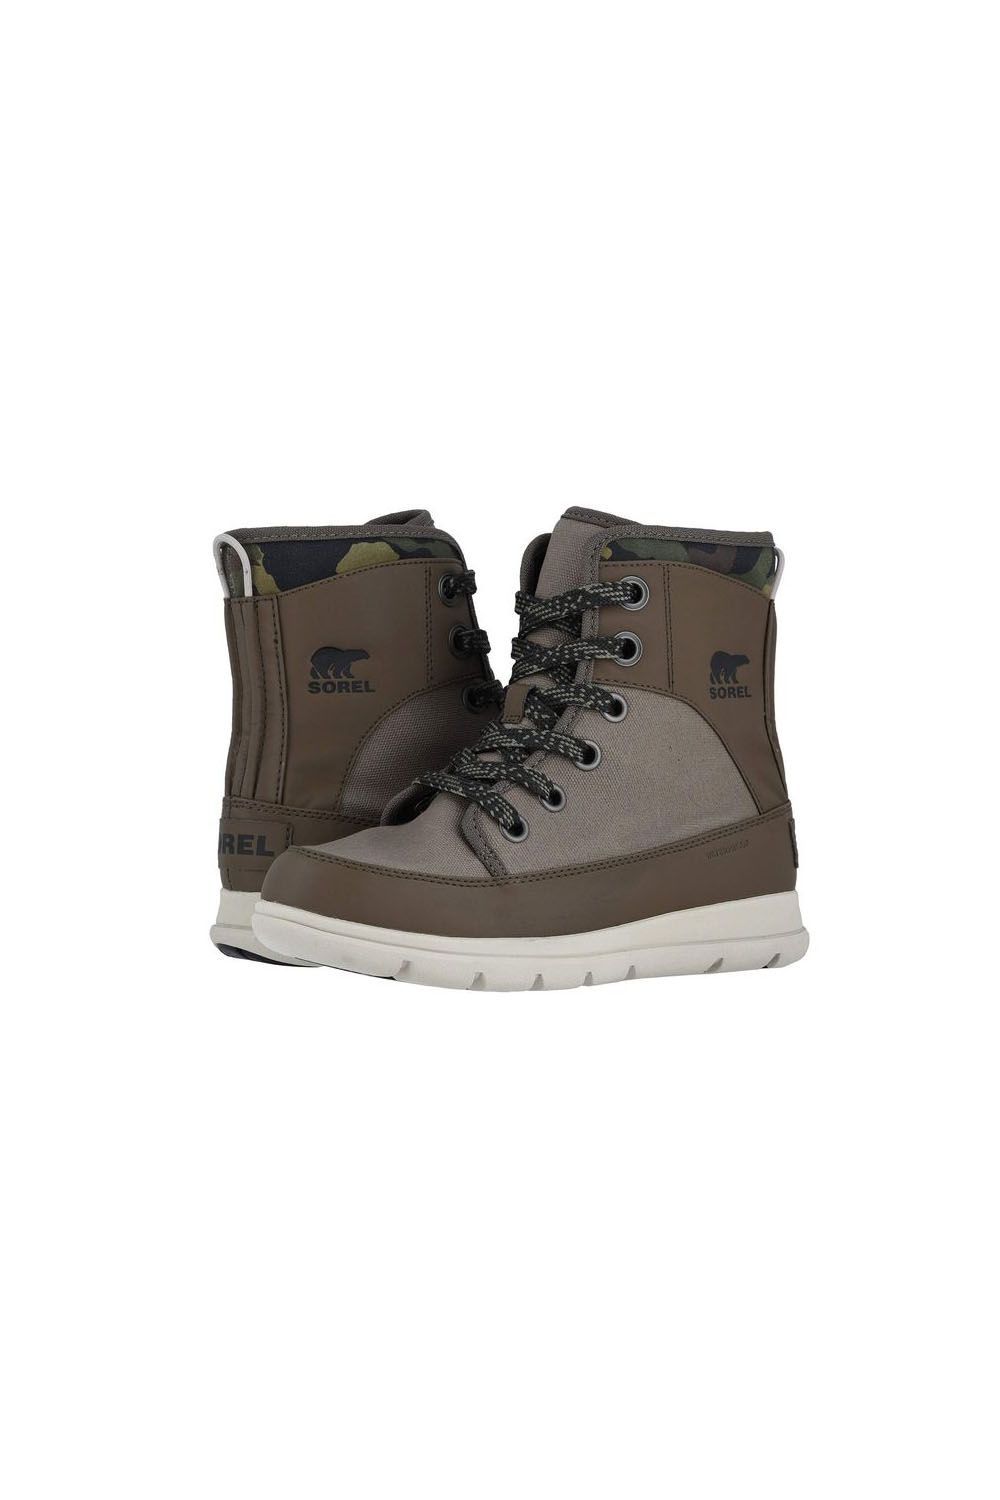 casual winter boots womens